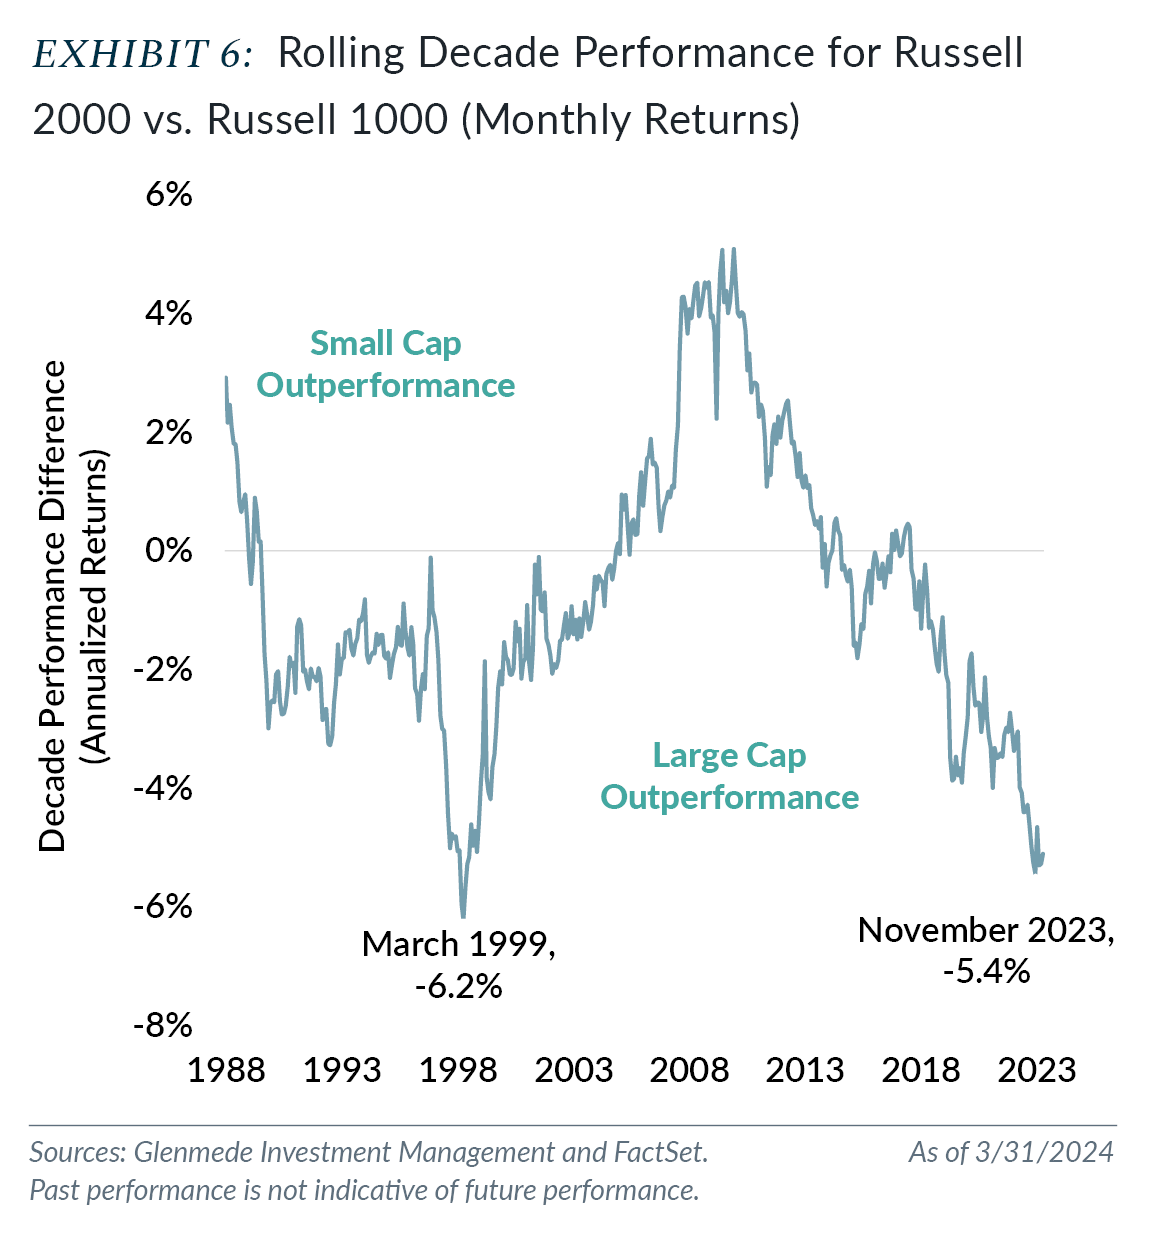 Exhibit 6: Rolling Decade Performance for Russell 2000 vs Russell 1000 (Monthly Returns)